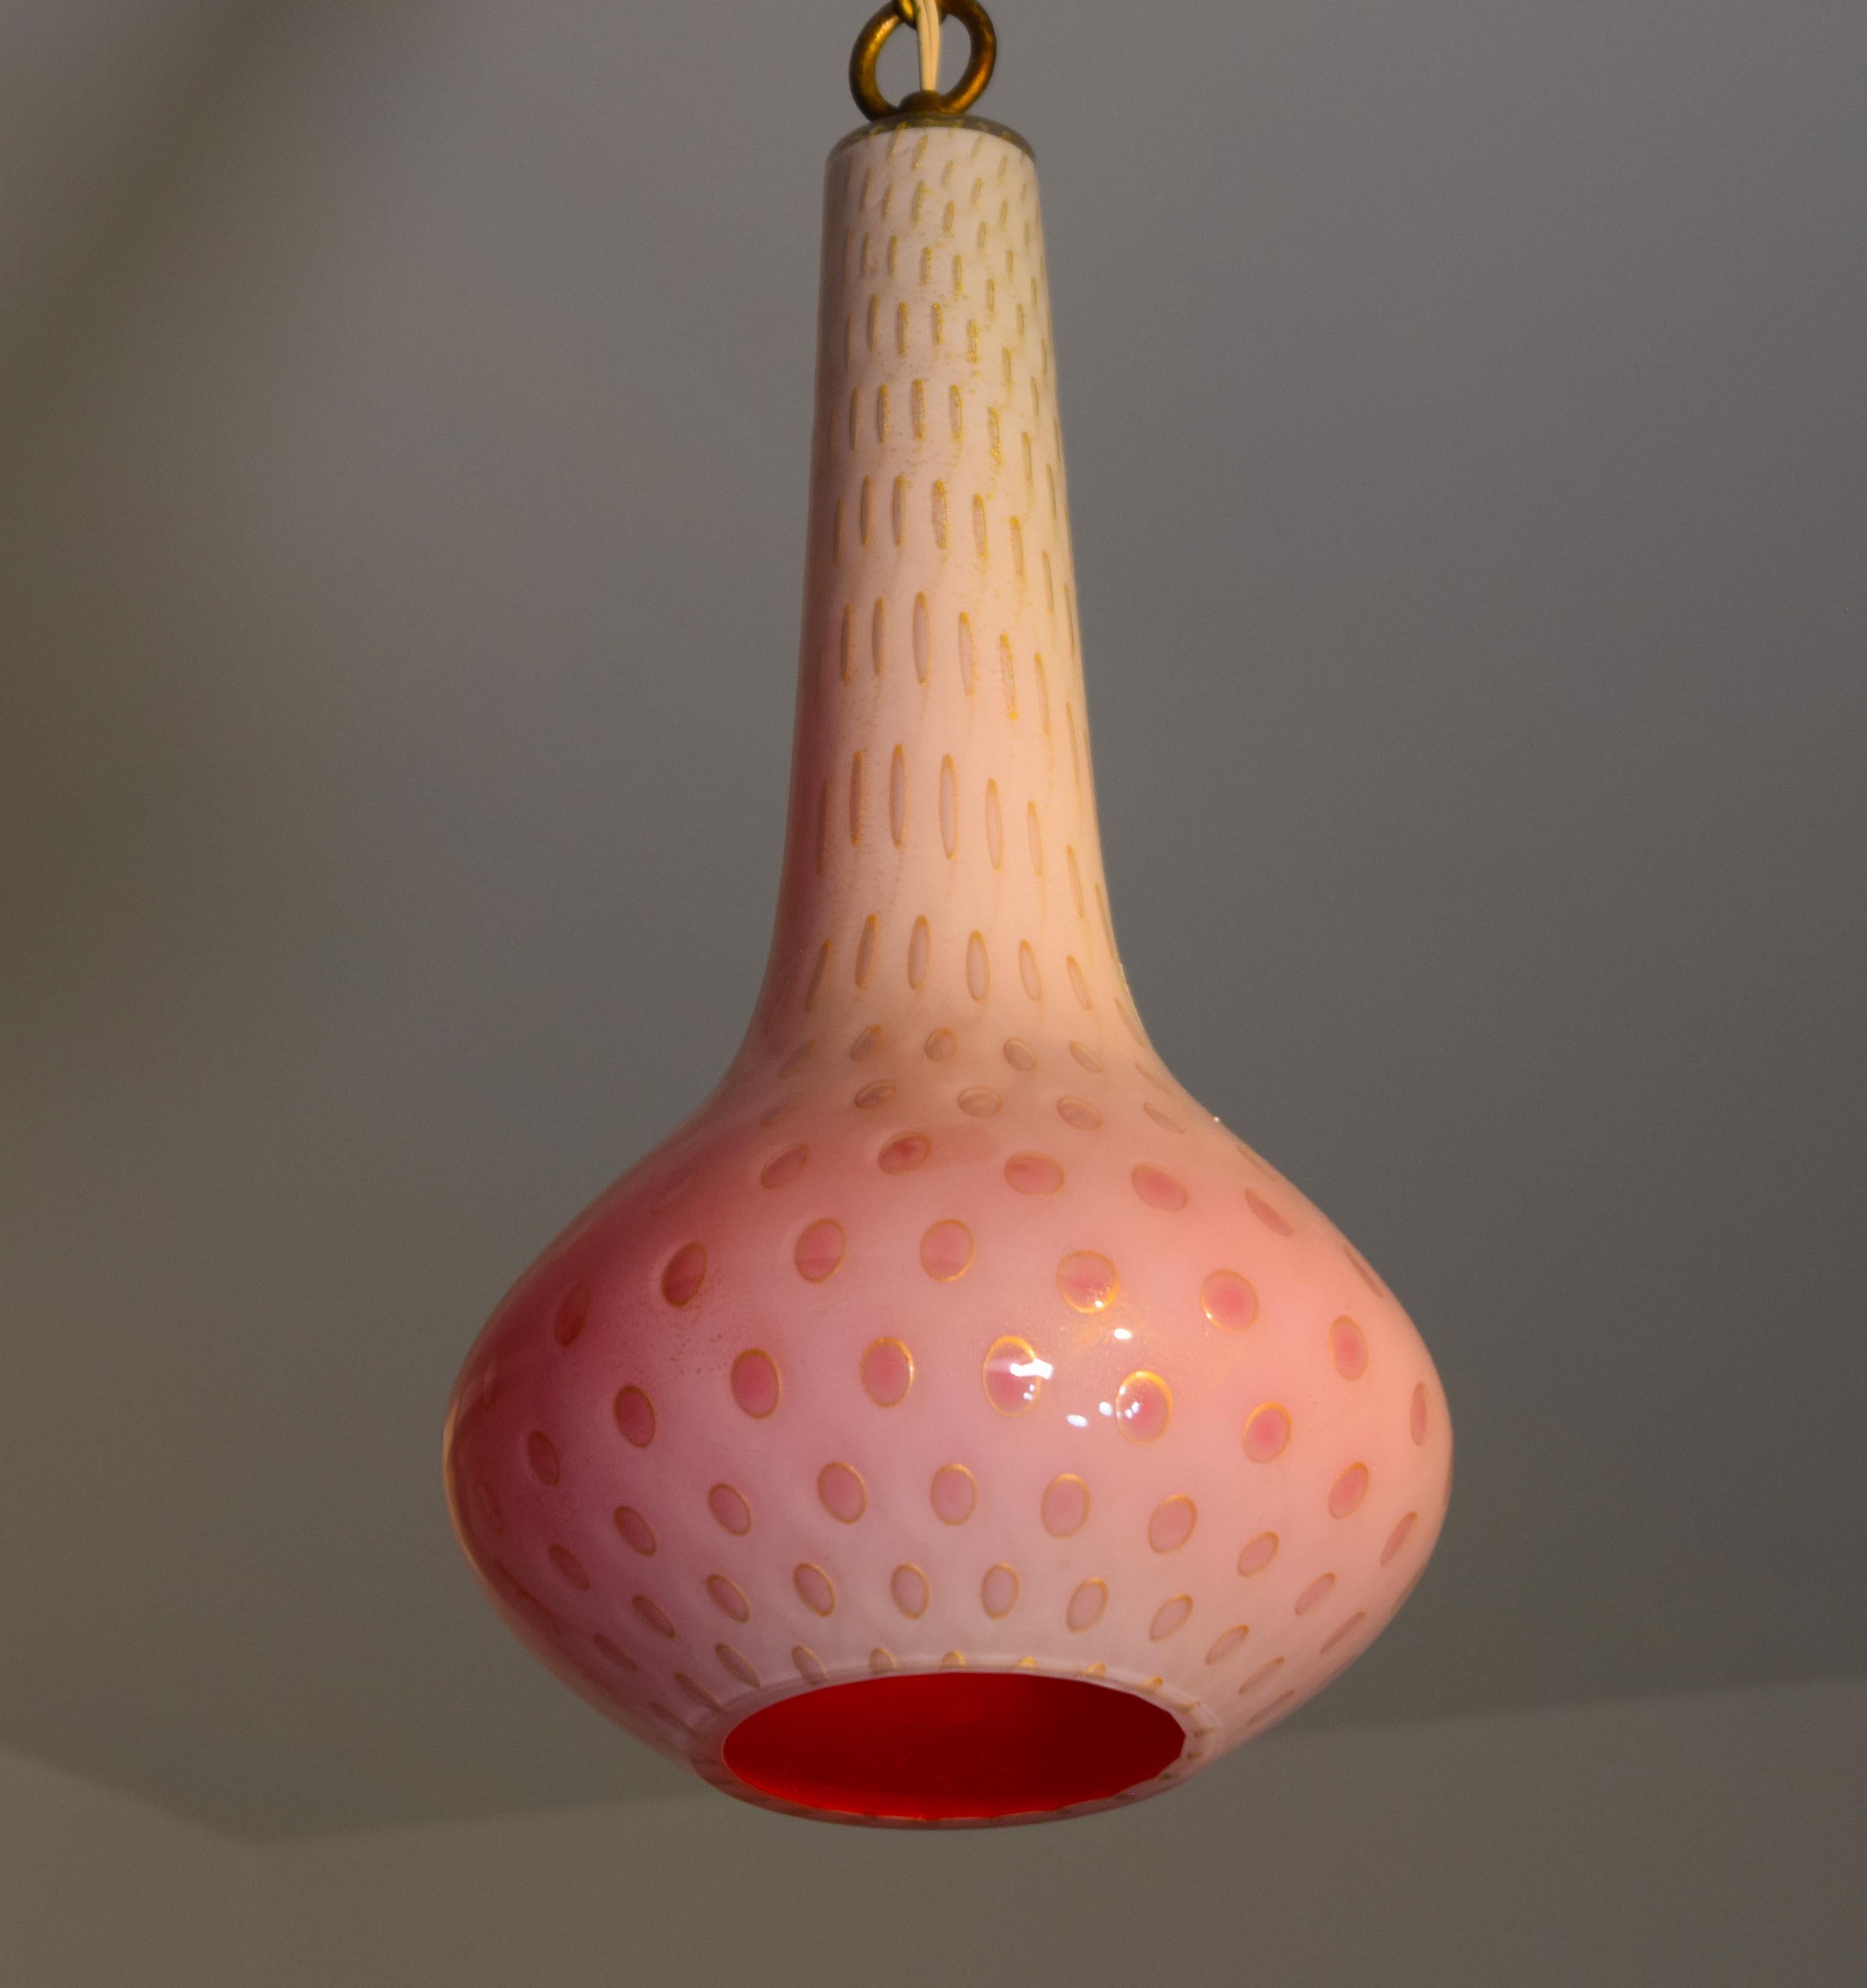 A rare pendant lamp by Aldrefo Barbini, Italy circa 1950. Cased genie glass with pink inside, and controlled bubbles in the outer glass with gold circles and flecks embedded in the white. Measures 23